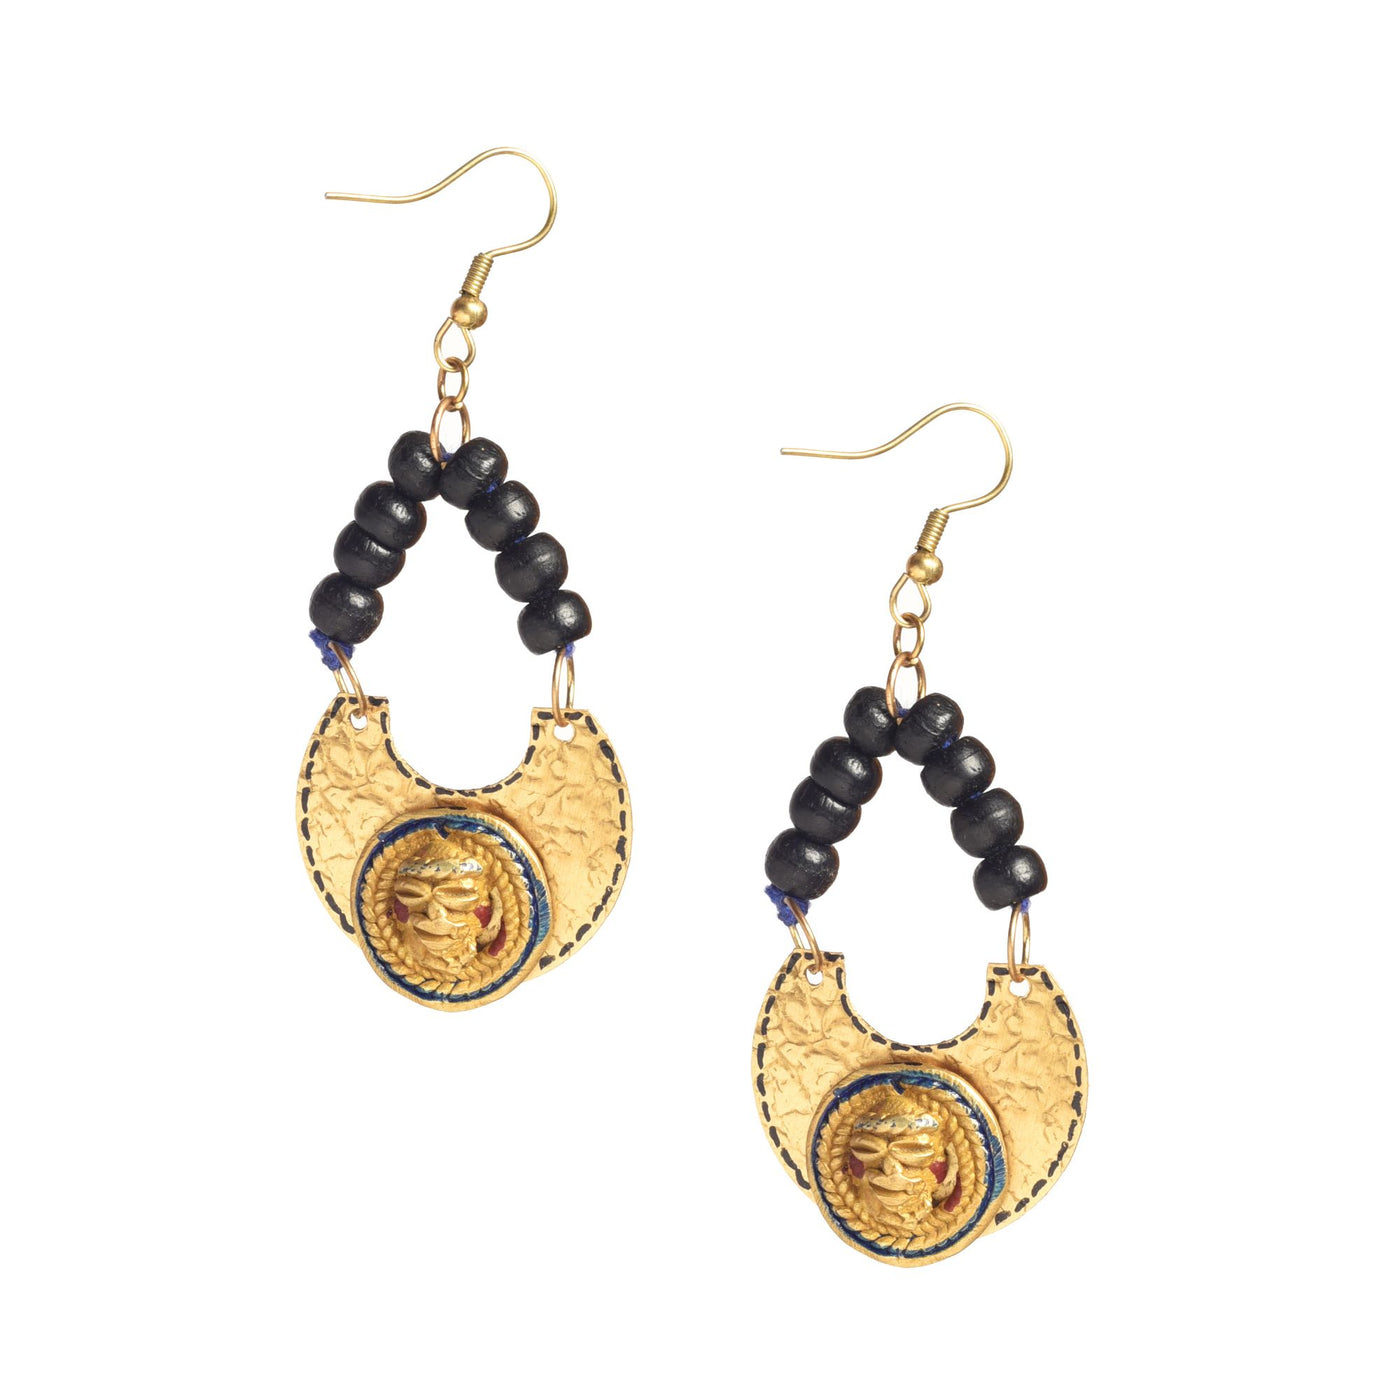 The Moon Queen Handcrafted Tribal Earrings - Fashion & Lifestyle - 4